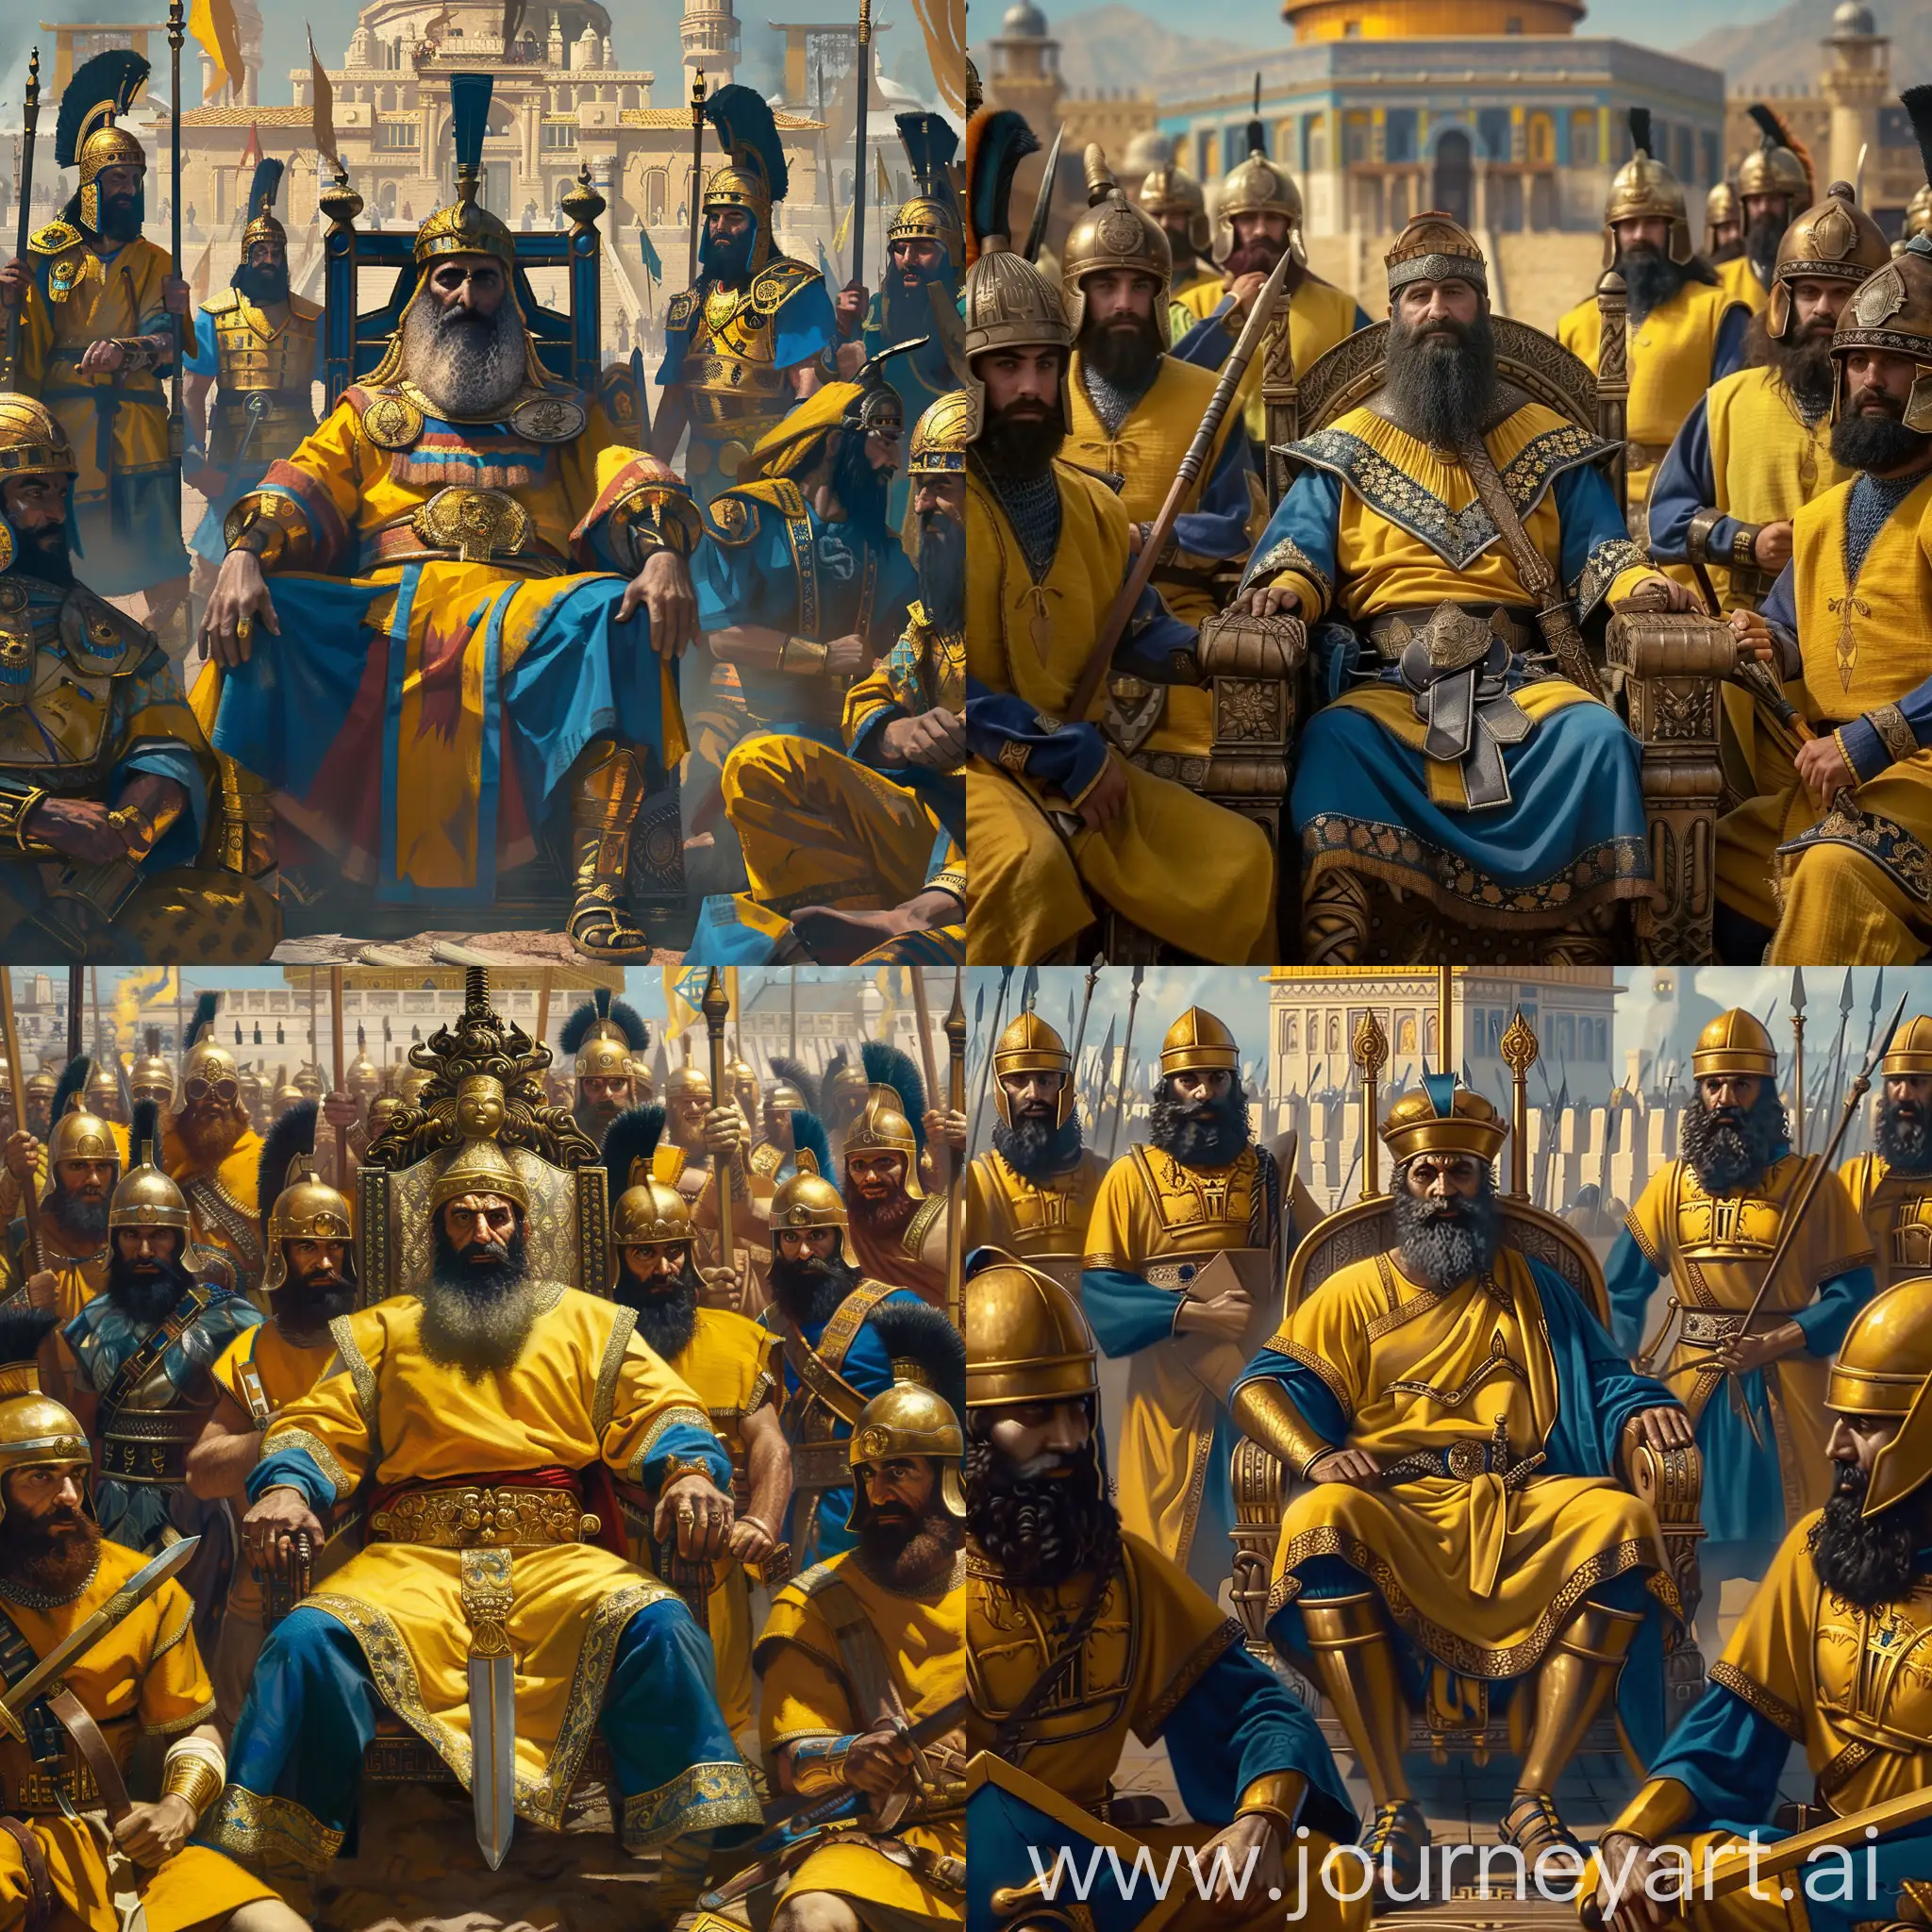 a middle-aged Hebrew king Solomon is sitting on his imperial throne in the middle, he has Hebrew style beard and Hebrew imperial costume,

other Hebrew warriors are in yellow and blue color armor, they hold bronze swords or spears in hands, they have Hebrew helmets and black beard, they stand around the king,

they are all before Jerusalem Temple, other Hebrew palaces as background,